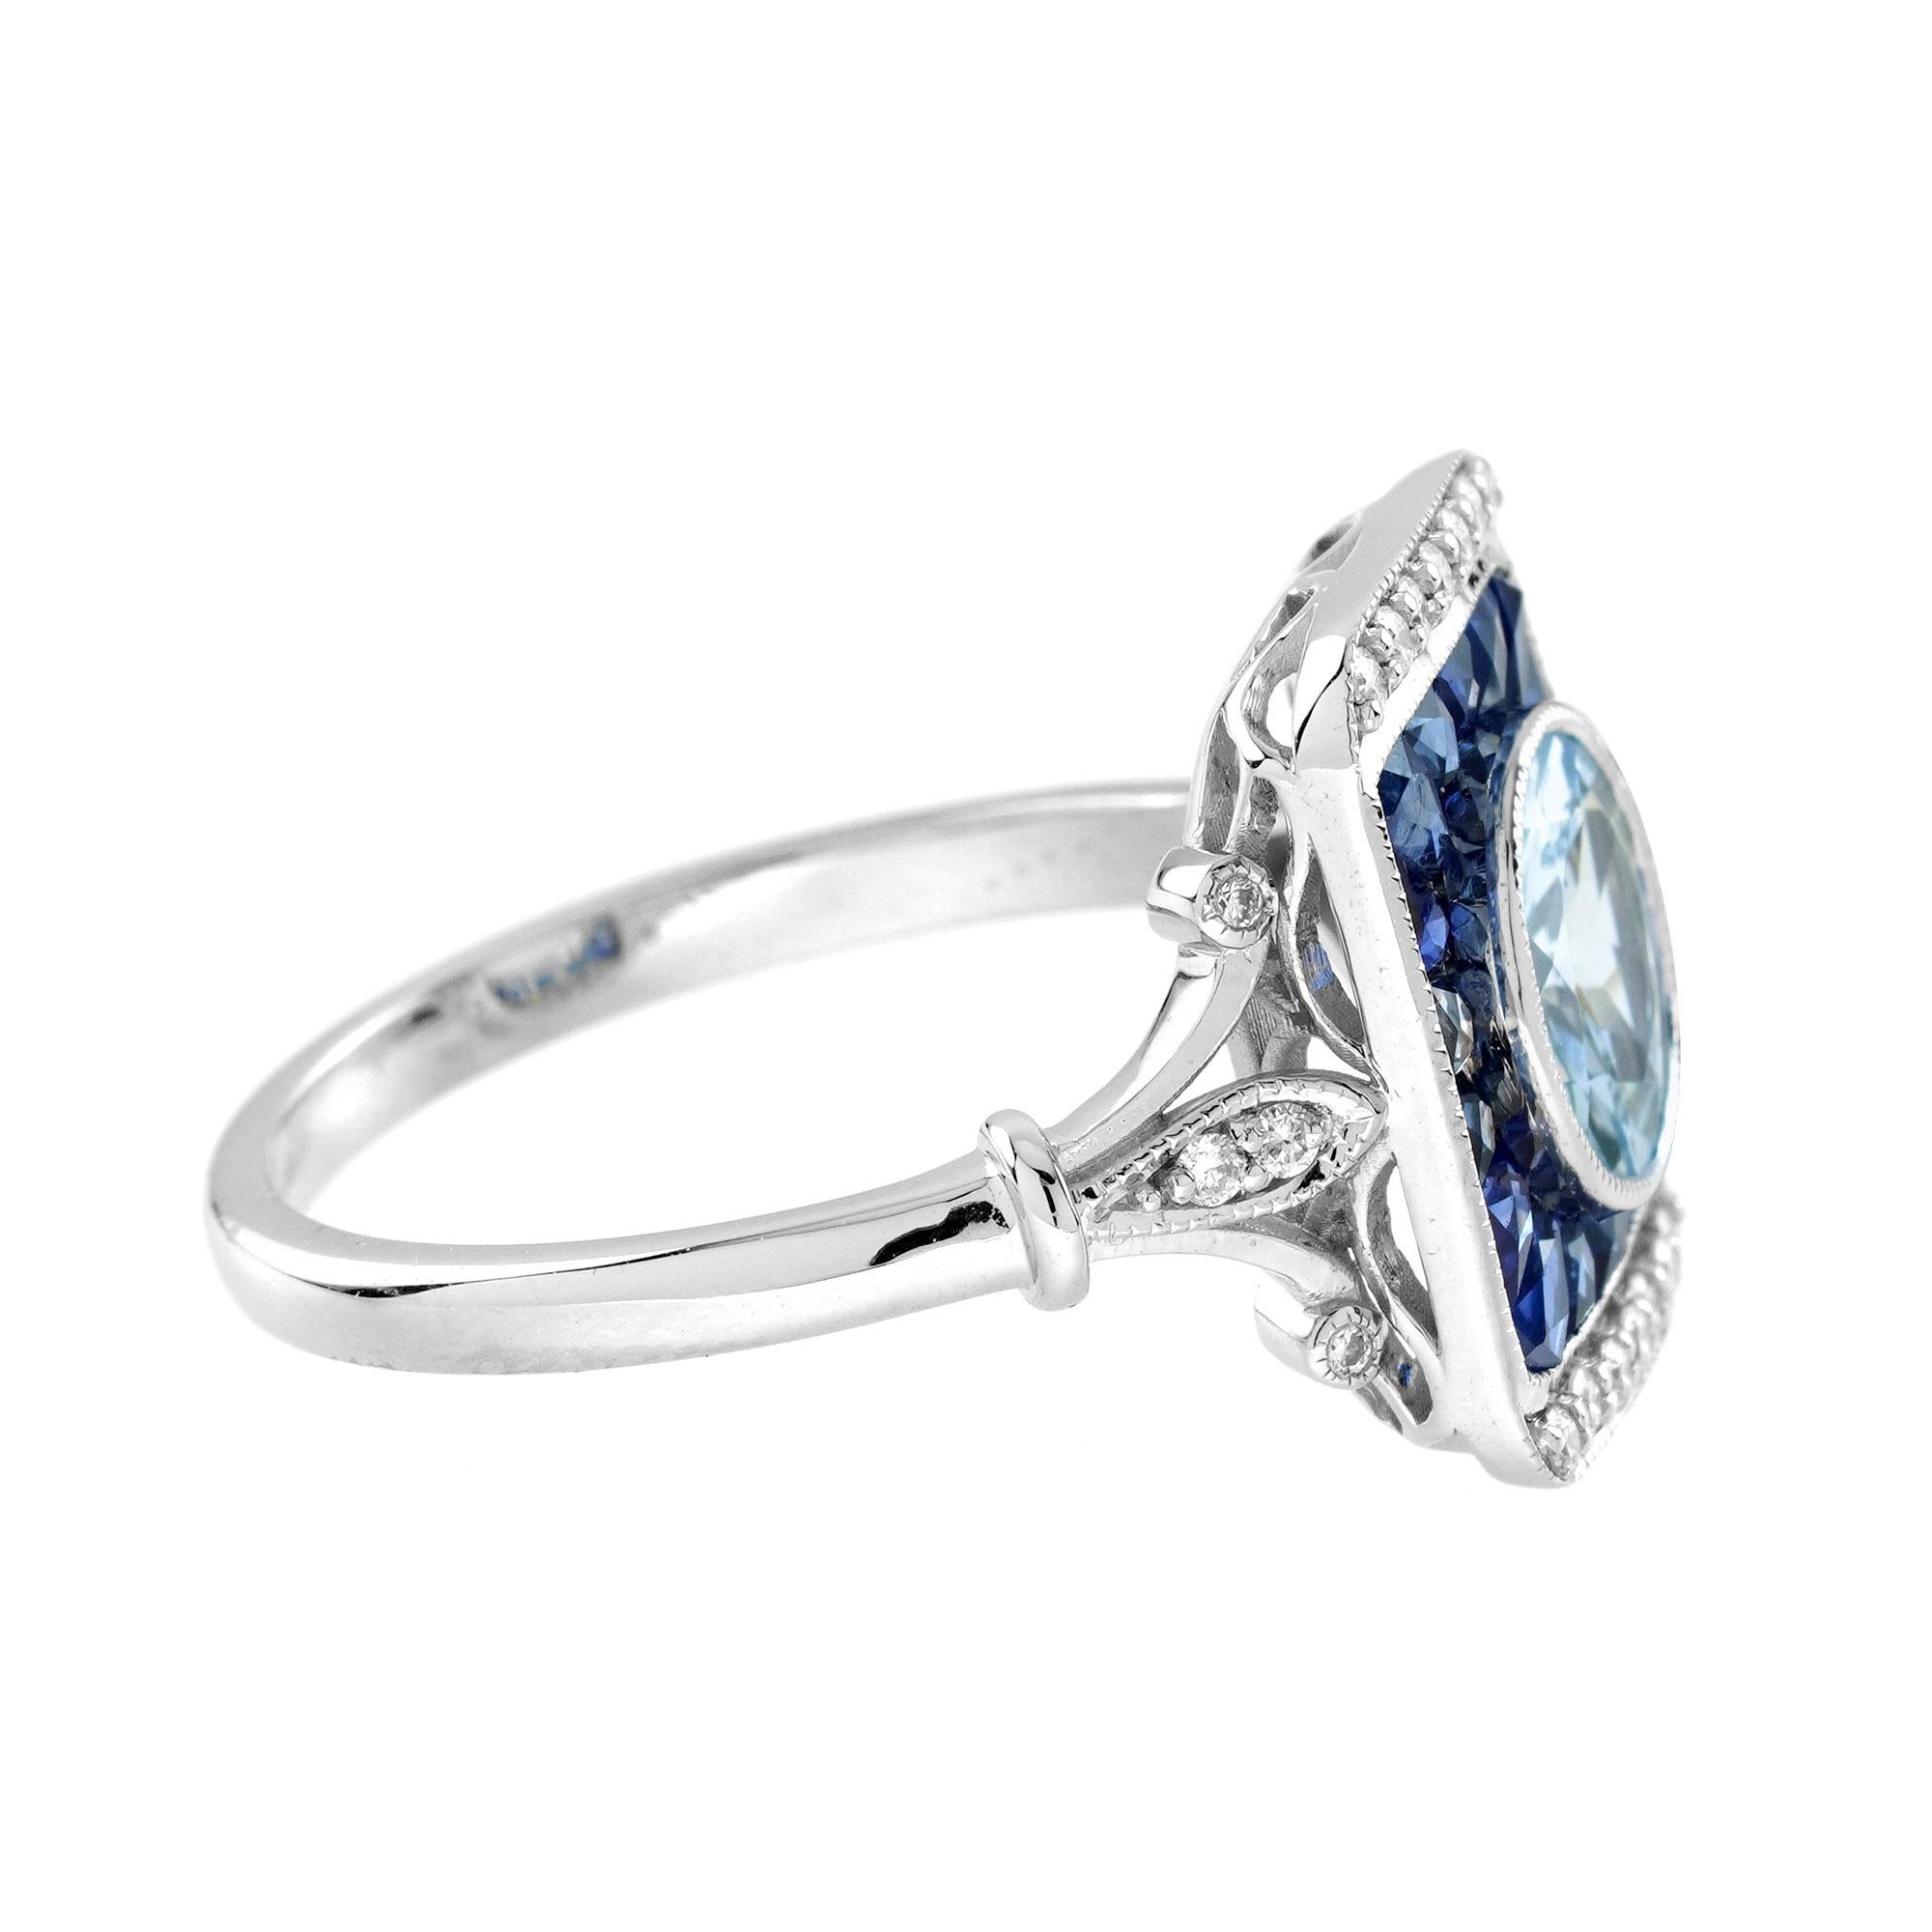 Round Cut 1.55 Ct. Aquamarine Blue Sapphire Diamond Engagement Ring in 18K White Gold For Sale